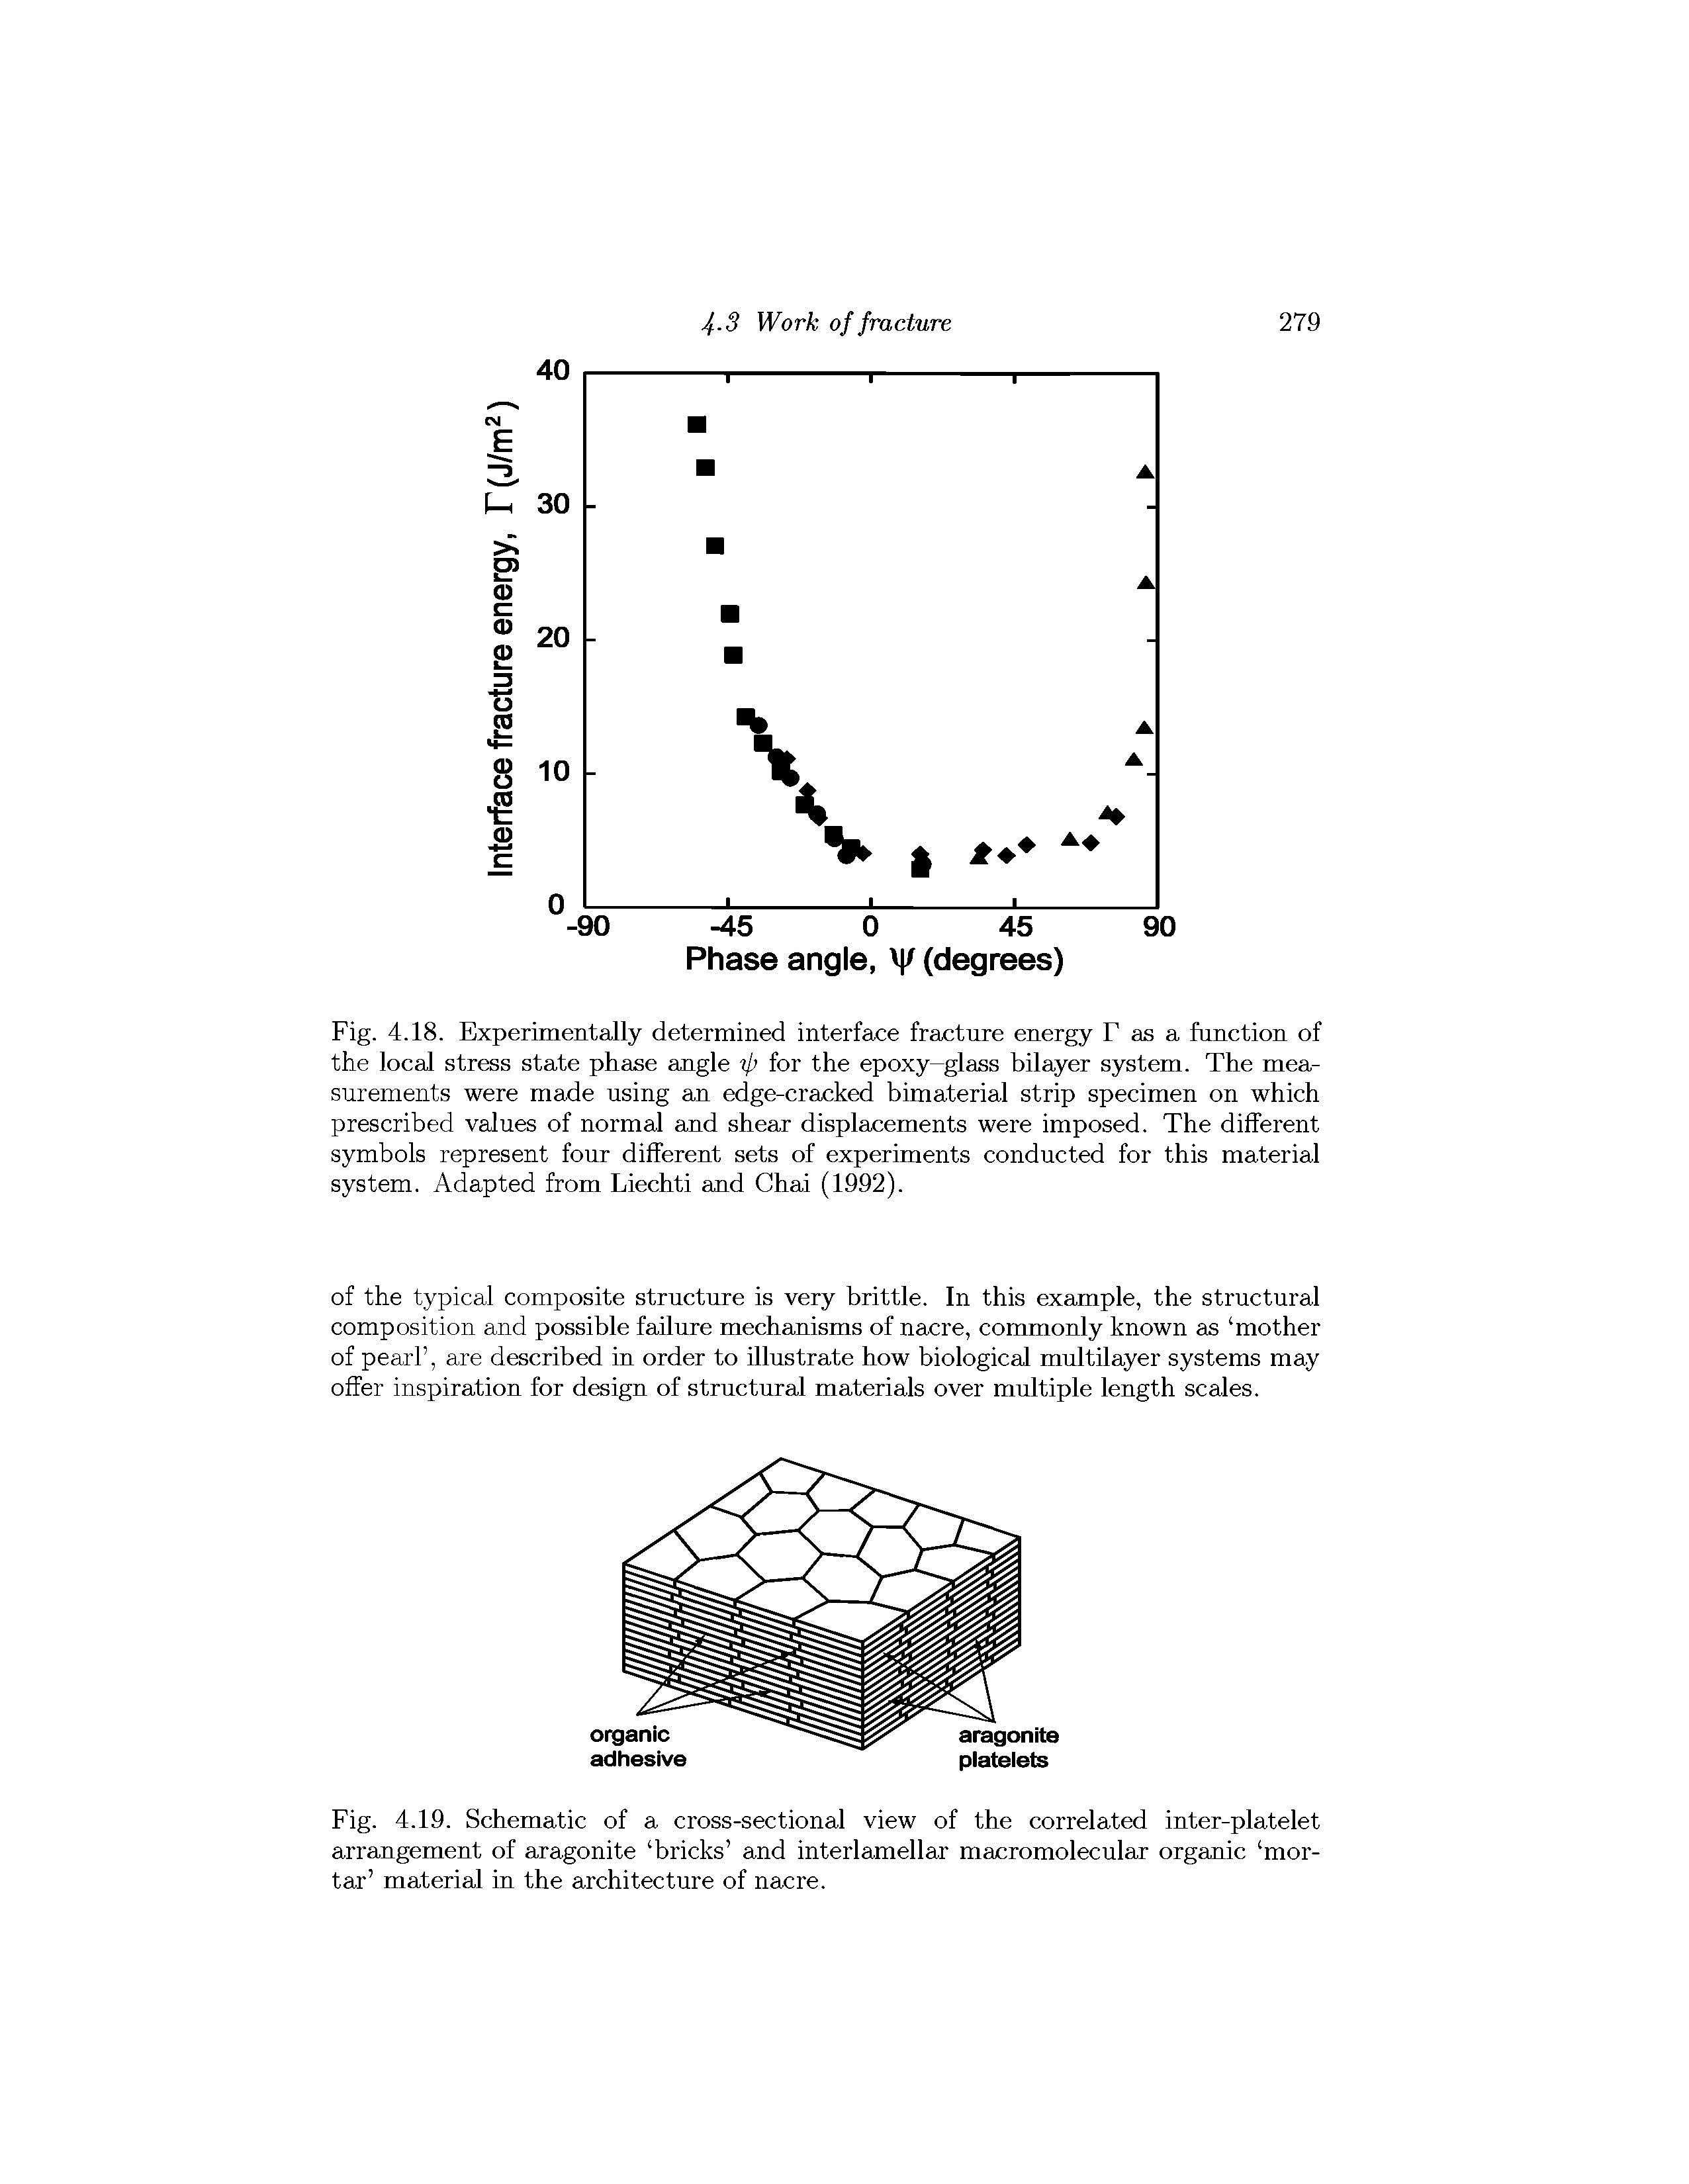 Fig. 4.18. Experimentally determined interface fracture energy F as a function of the local stress state phase angle for the epoxy—glass bilayer system. The measurements were made using an edge-cracked bimaterial strip specimen on which prescribed values of normal and shear displacements were imposed. The different symbols represent four different sets of experiments conducted for this material system. Adapted from Liechti and Ghai (1992).